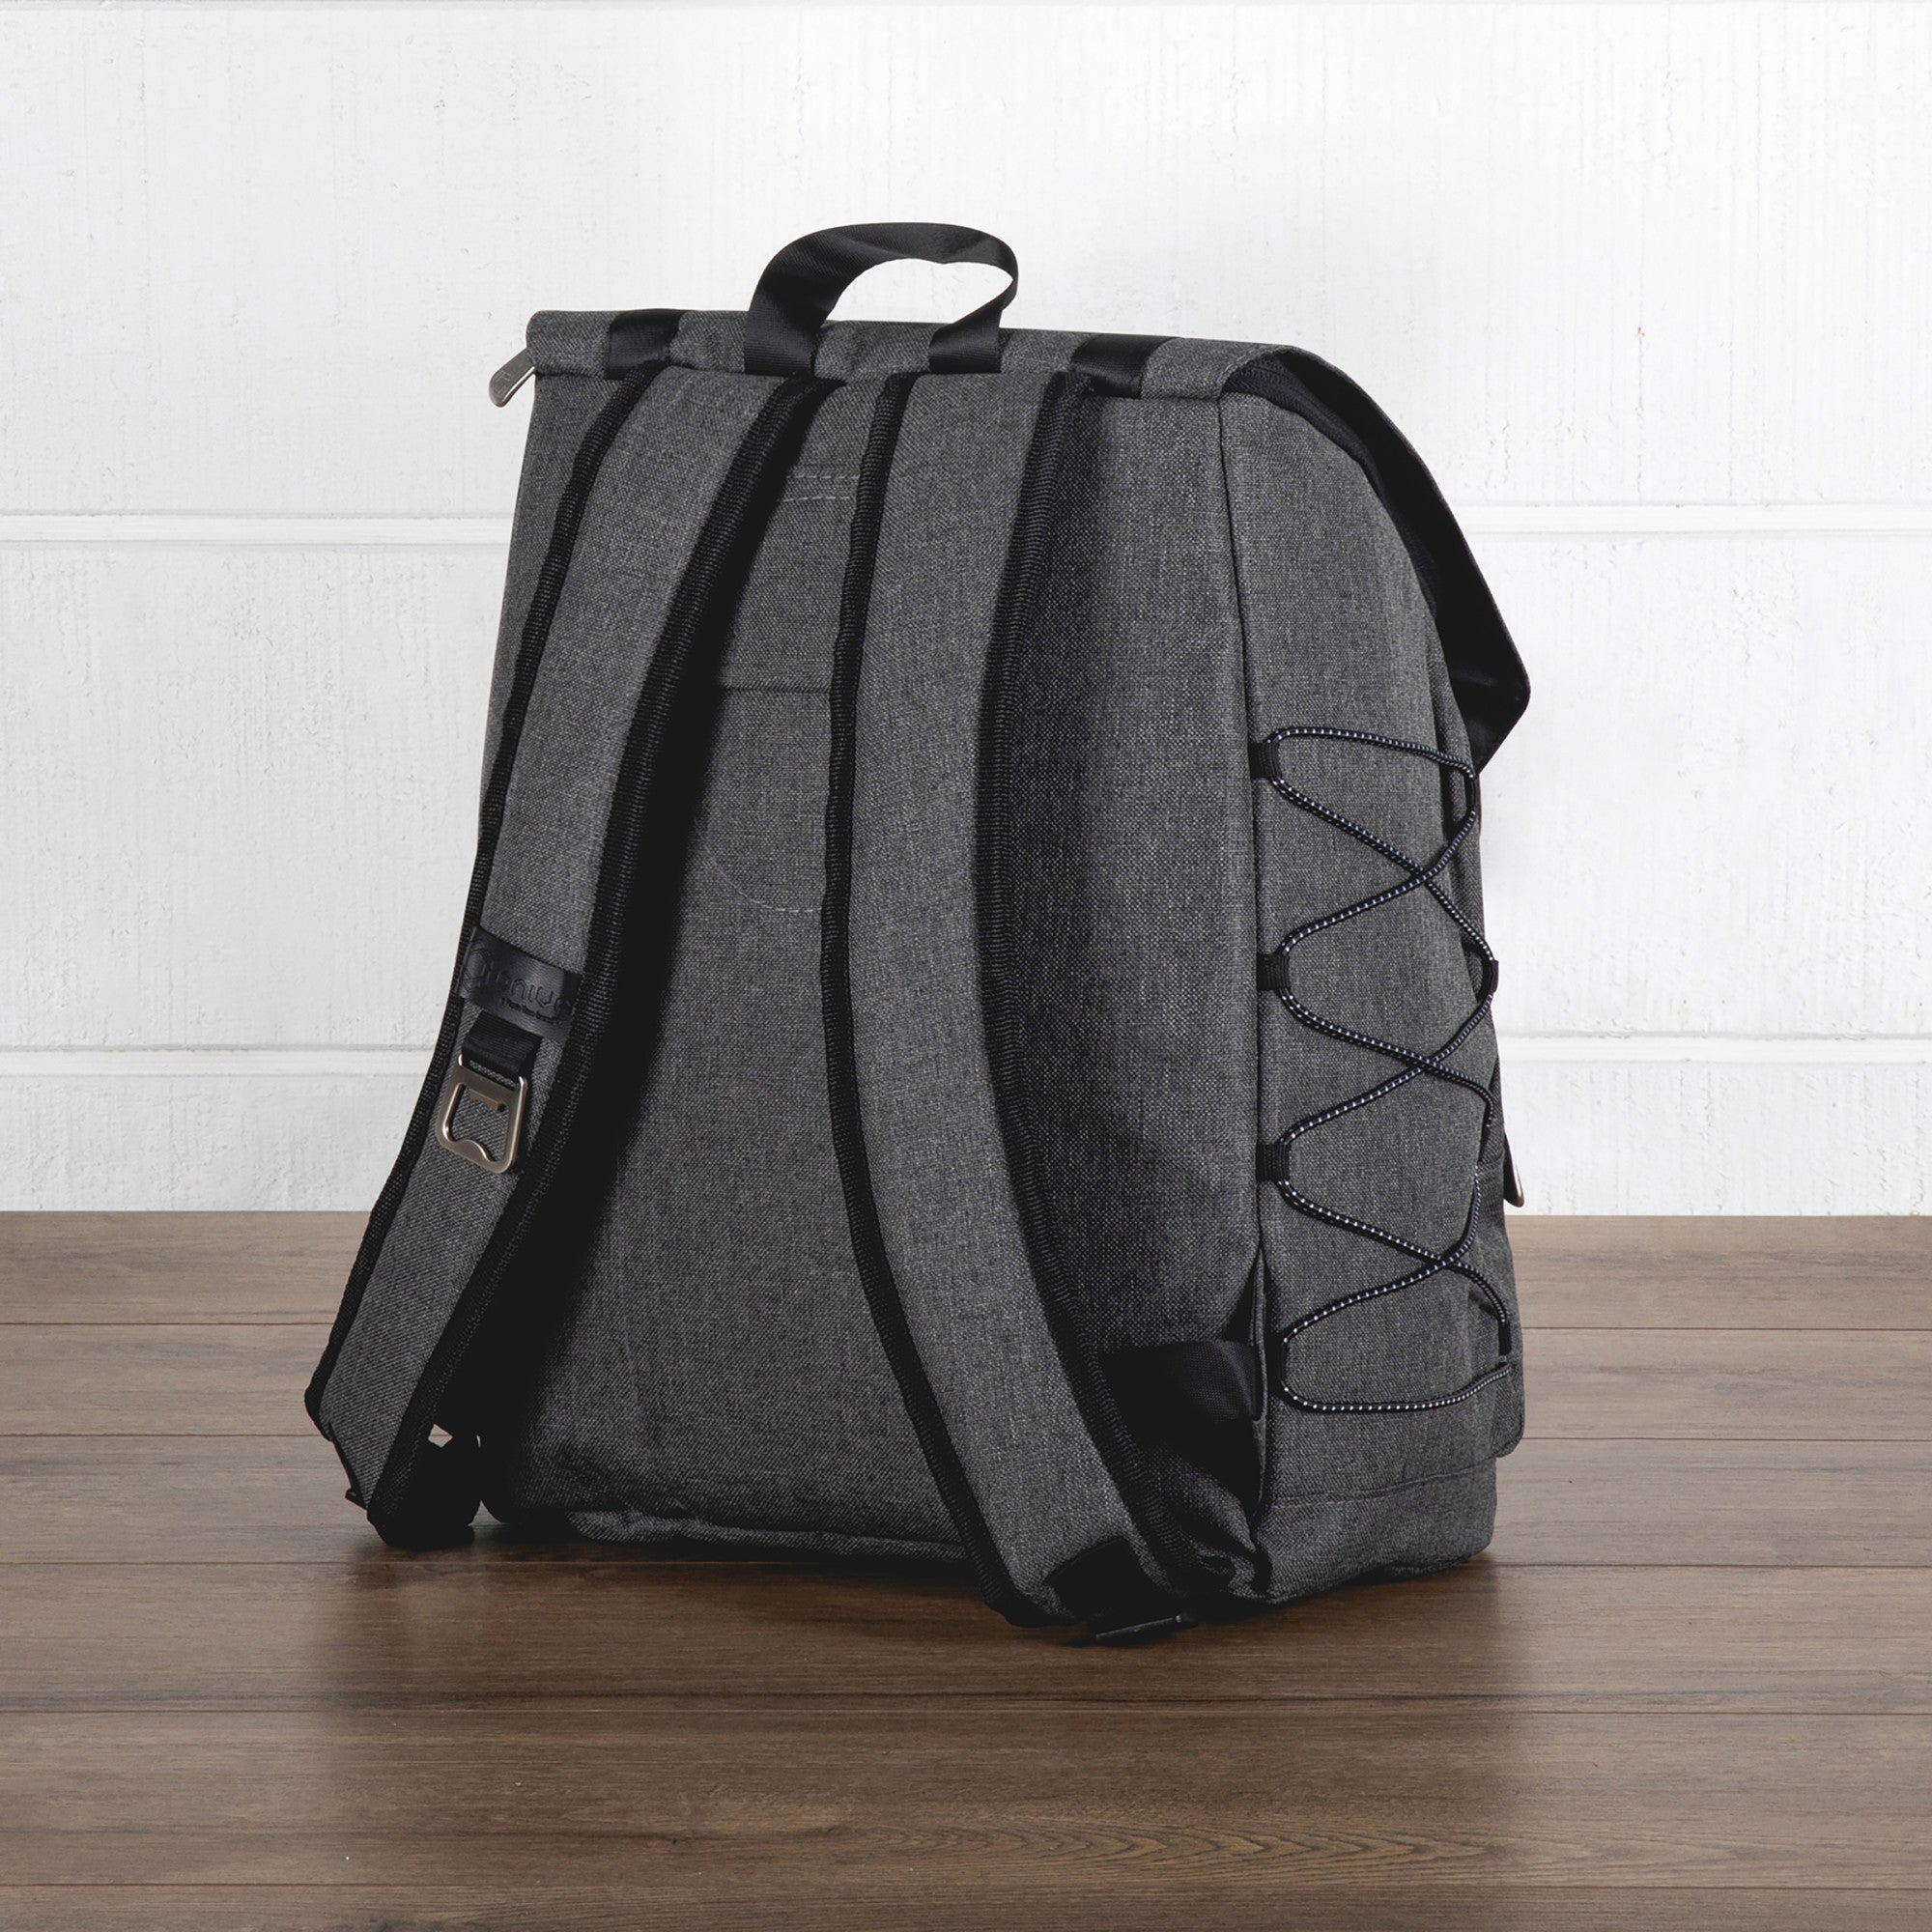 On The Go Traverse Backpack Cooler